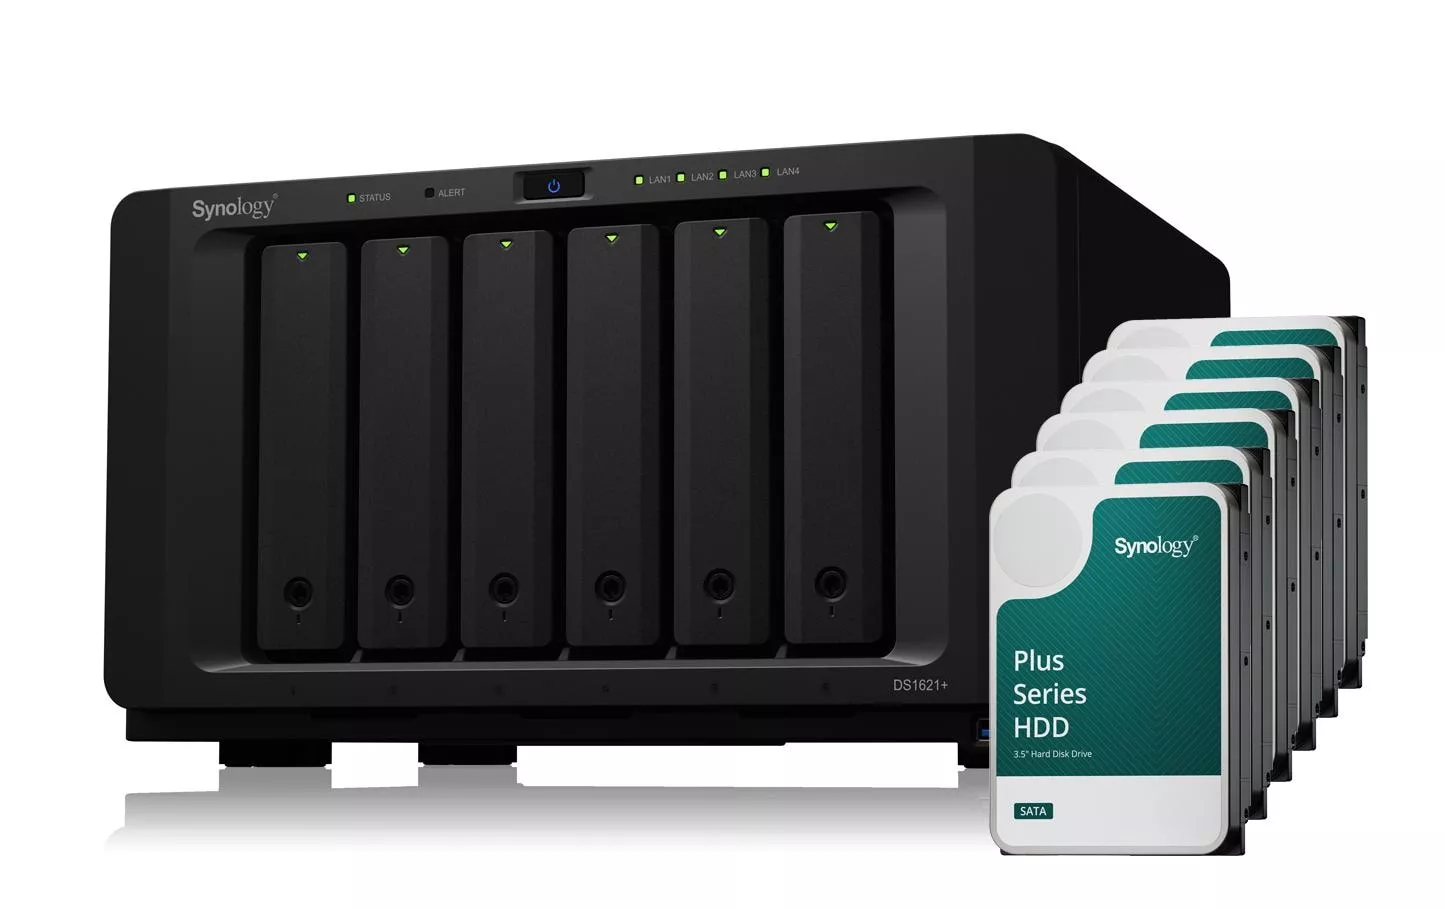 NAS DiskStation DS1621+ 6-bay Synology Plus HDD 96 TB